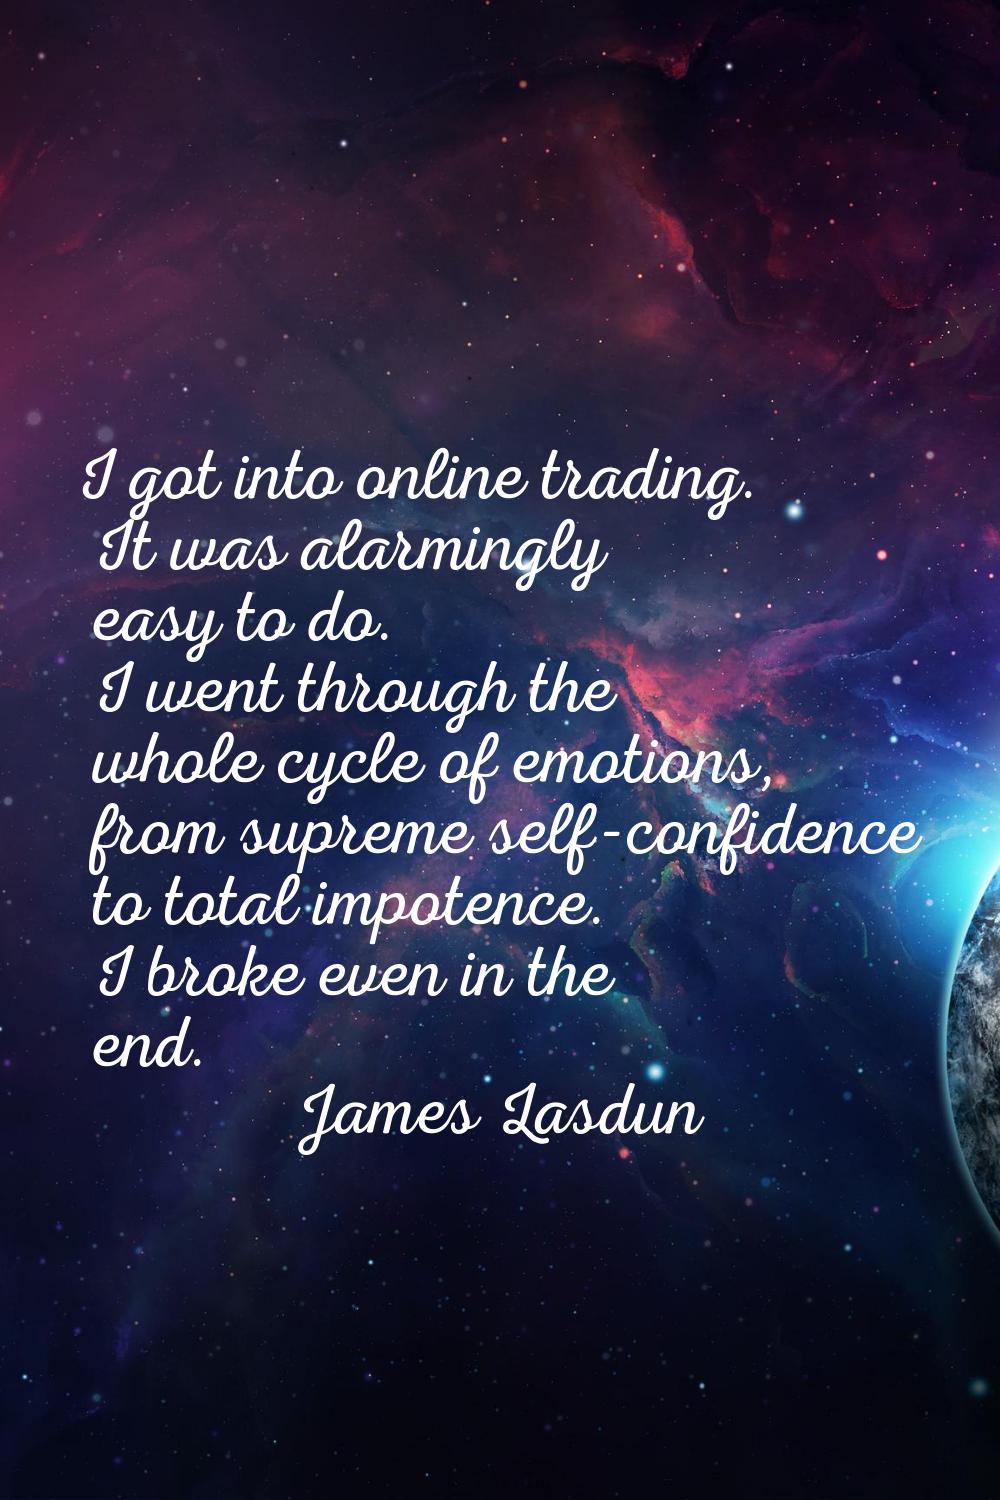 I got into online trading. It was alarmingly easy to do. I went through the whole cycle of emotions